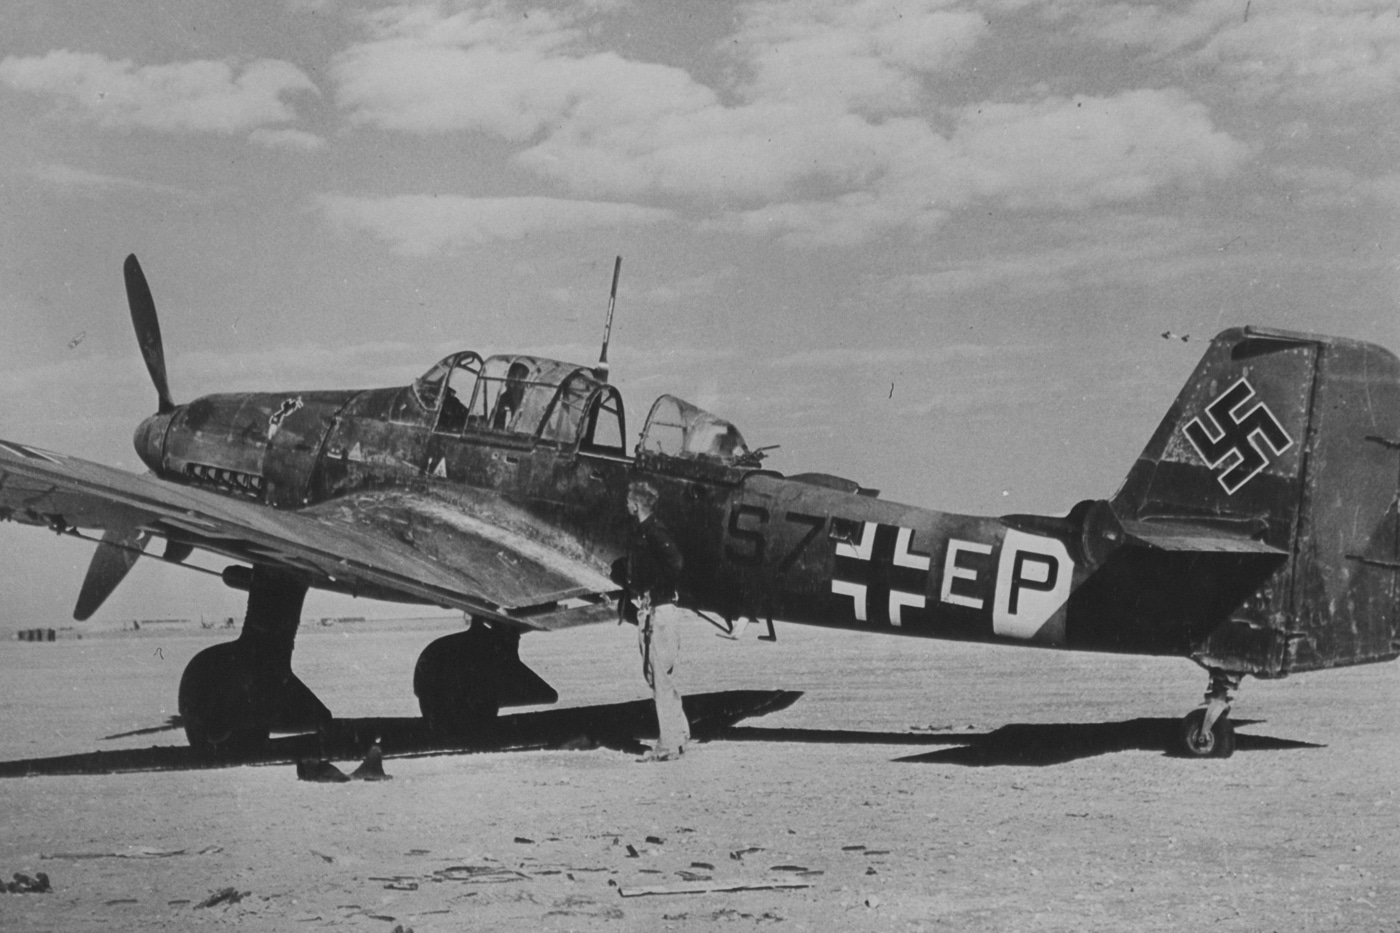 In this photo, we see members of the USAAF inspecting a Stuka abandoned by German troops in Algeria. The United States Air Force is the air service branch of the United States Armed Forces, and is one of the eight uniformed services of the United States. During World War II, it was part of the U.S. Army.